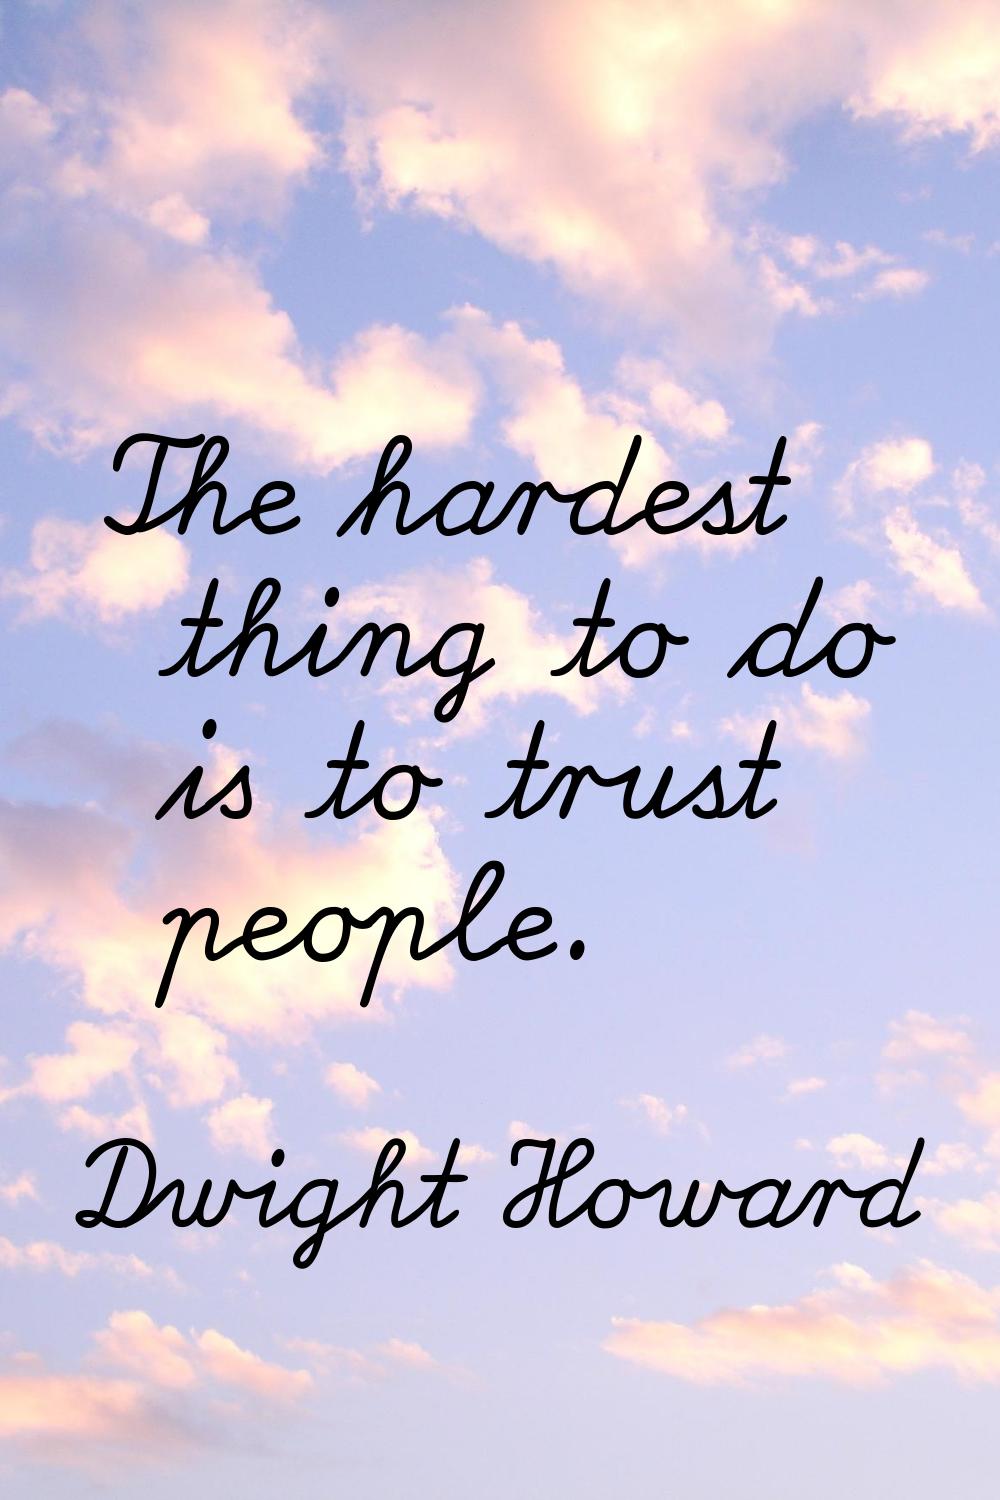 The hardest thing to do is to trust people.